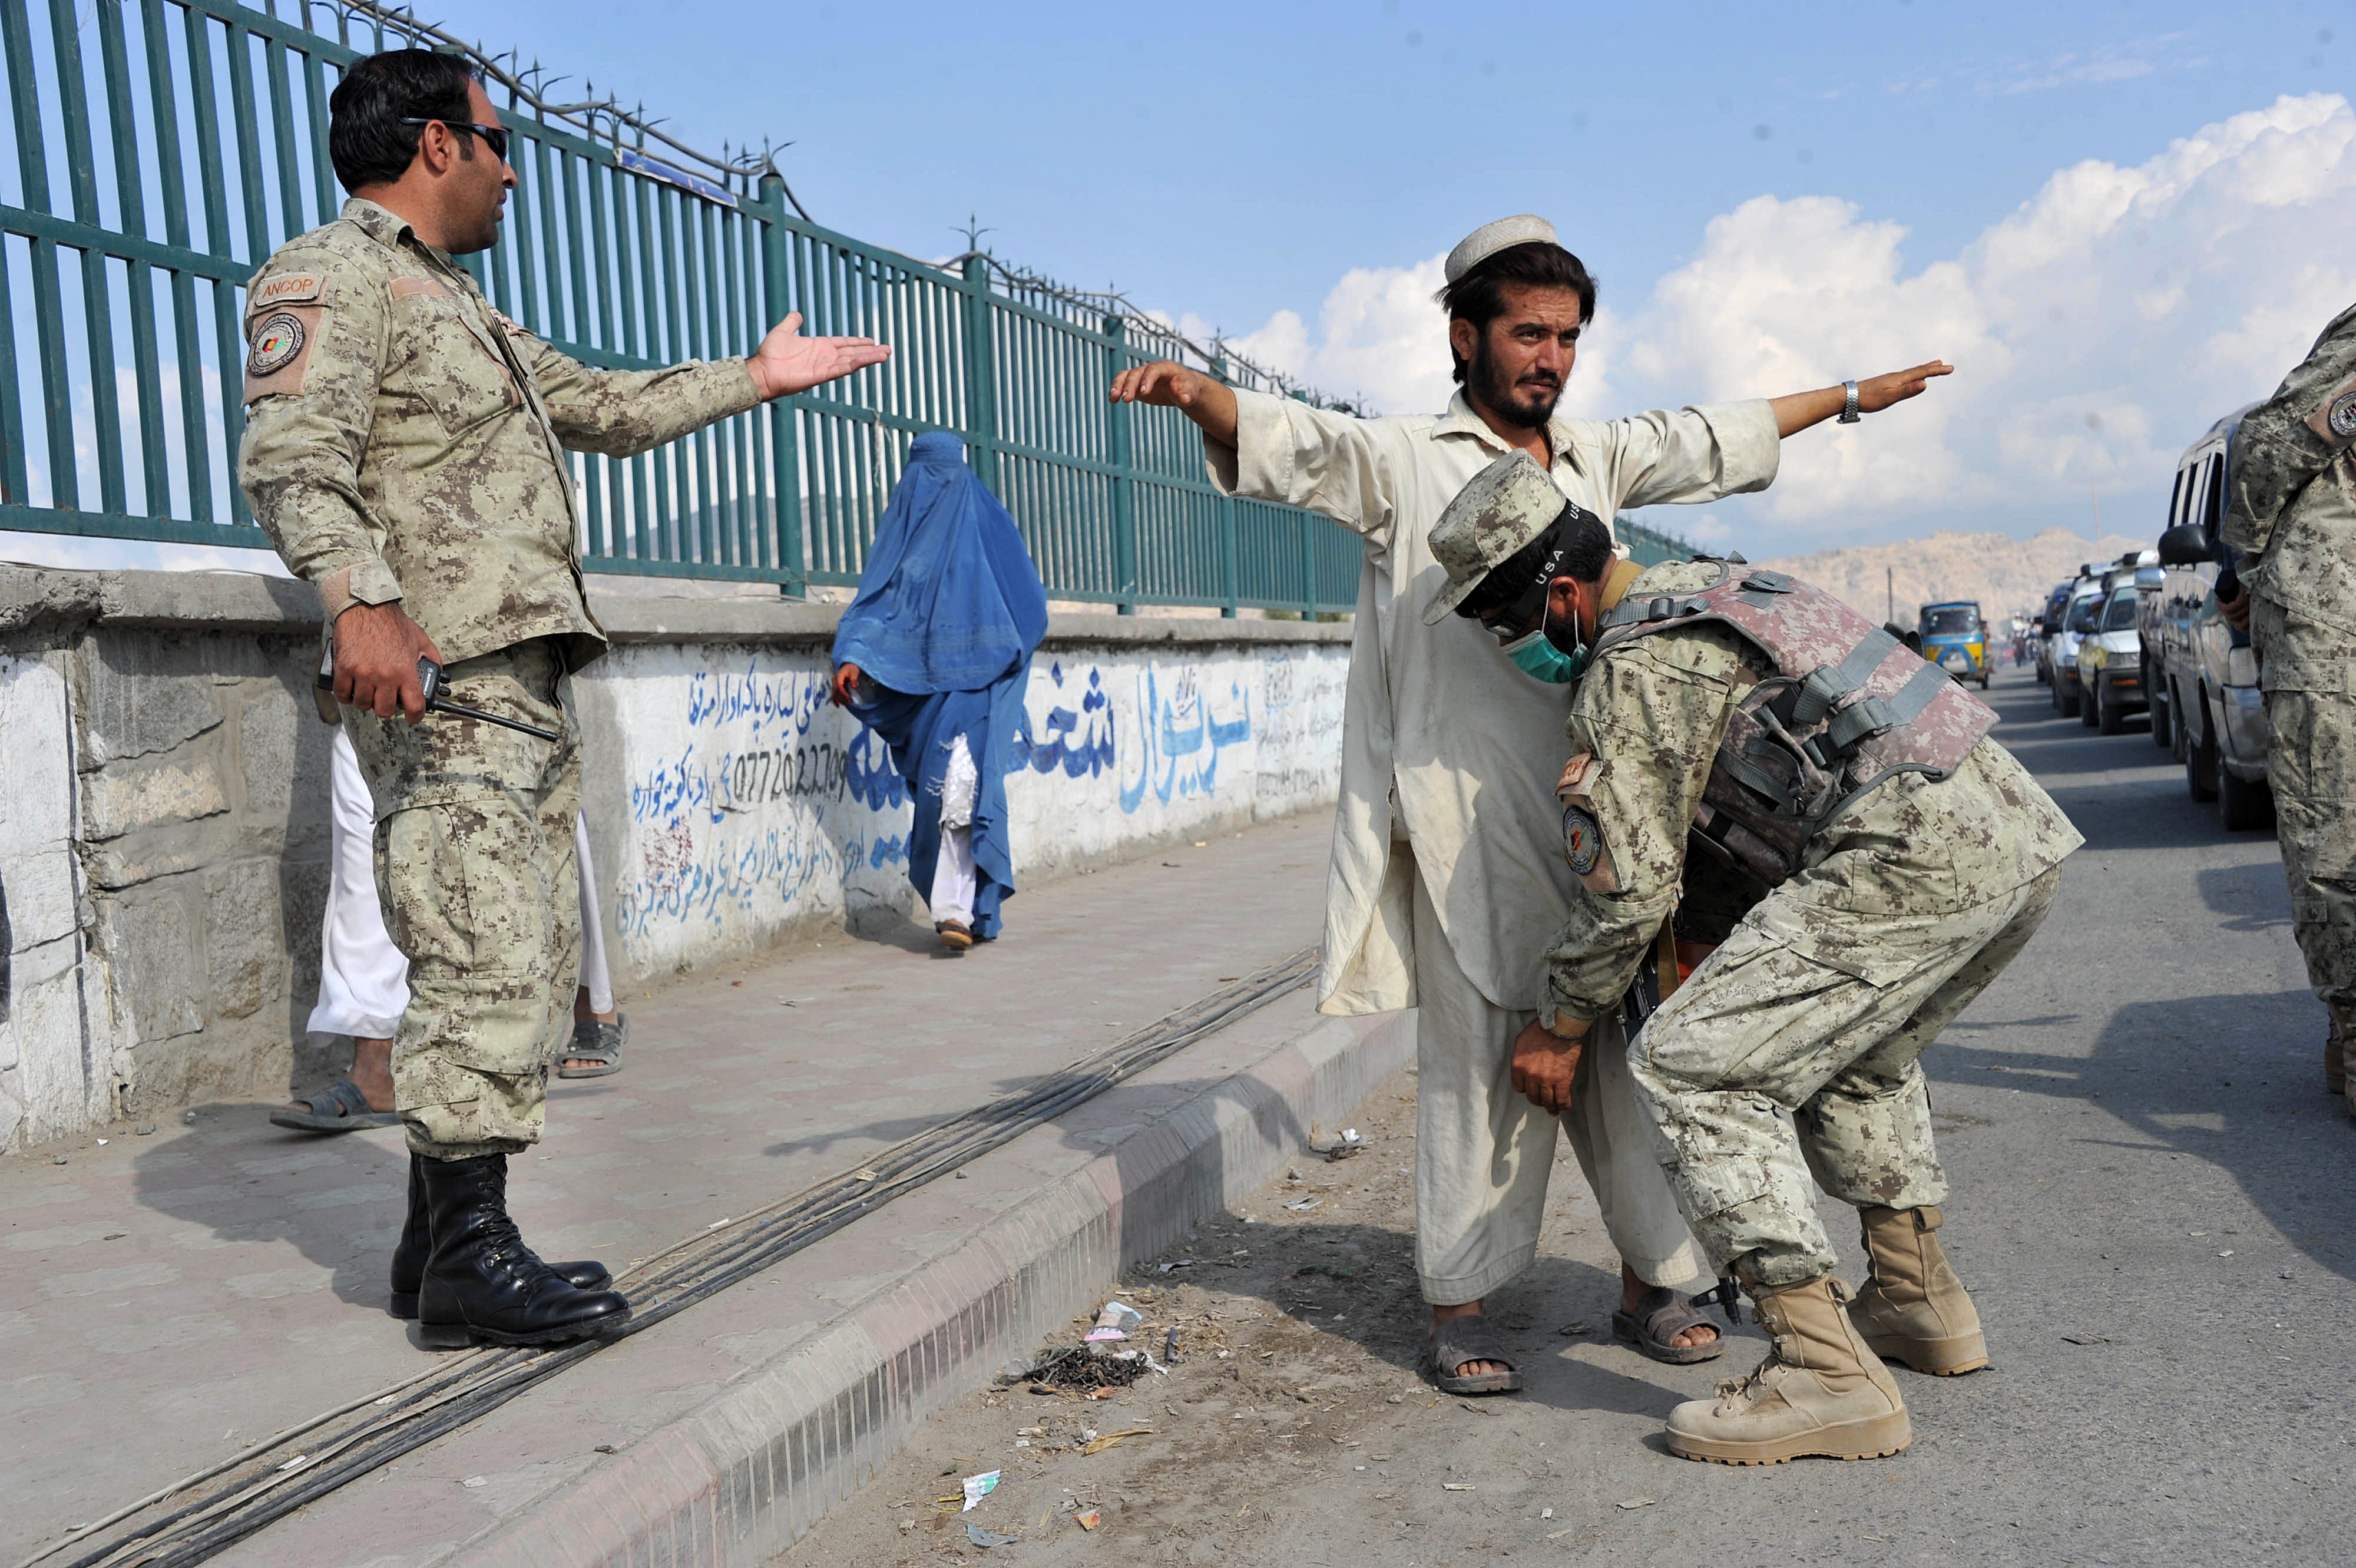 Afghan security personel check passengers and cars at a checkpoint in the city of Jalalabad in Nangarhar province on October 20, 2012. (AFP Photo/ Noorullah Shirzada)